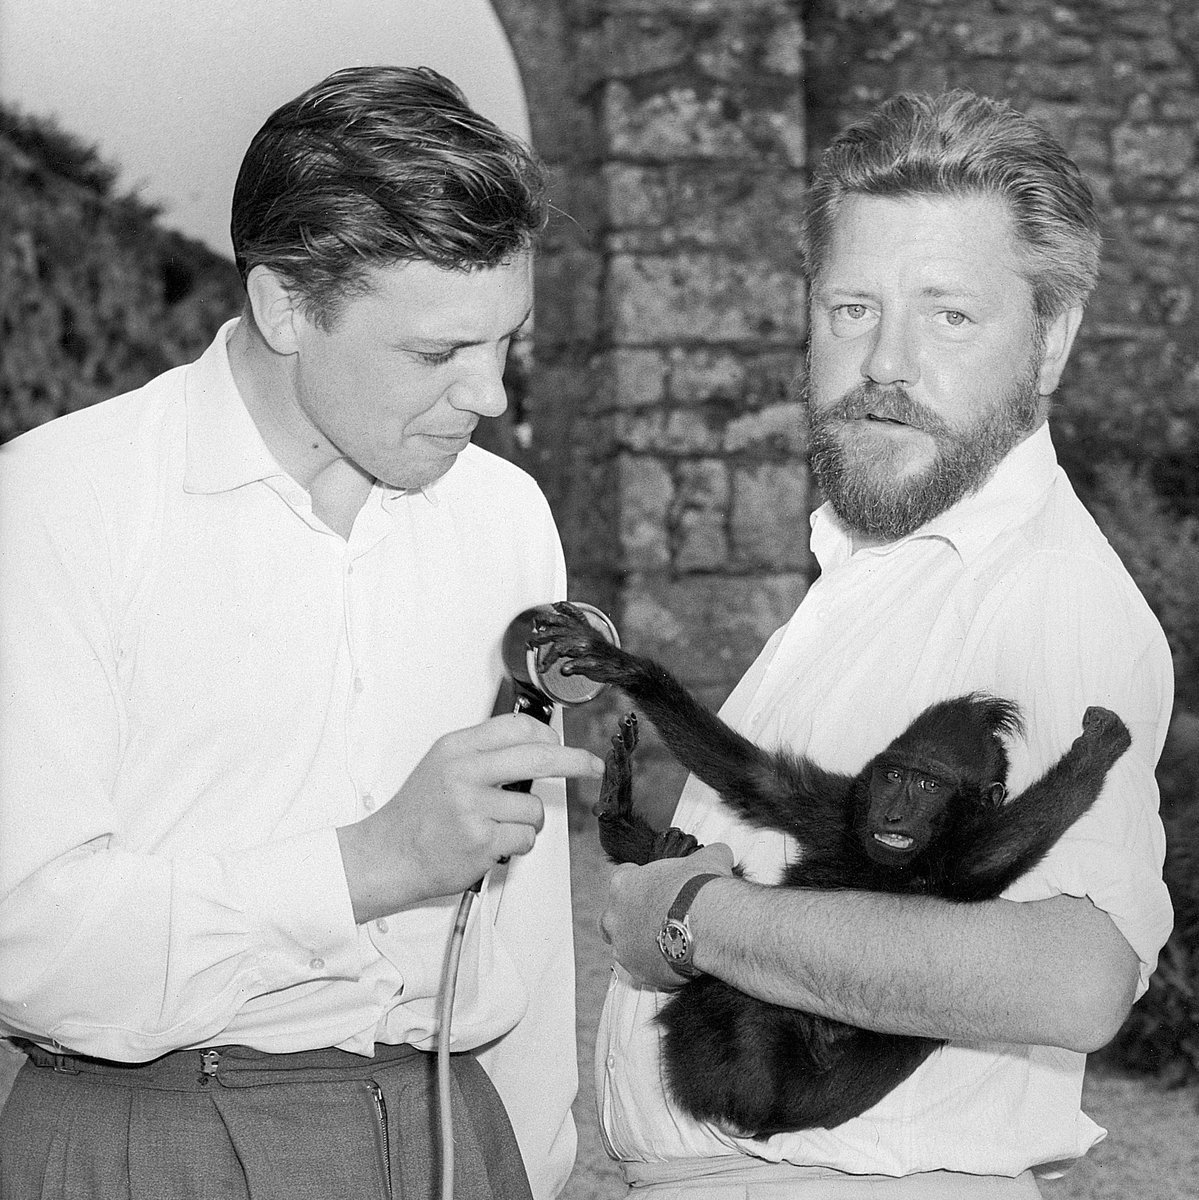 🎂 Happy 98th Birthday to Honorary Fellow of Durrell, Sir David Attenborough! 🎂 💚 Gerald Durrell and Sir David first met in South America over 60 years ago. The two formed a friendship over their shared passion for the natural world.